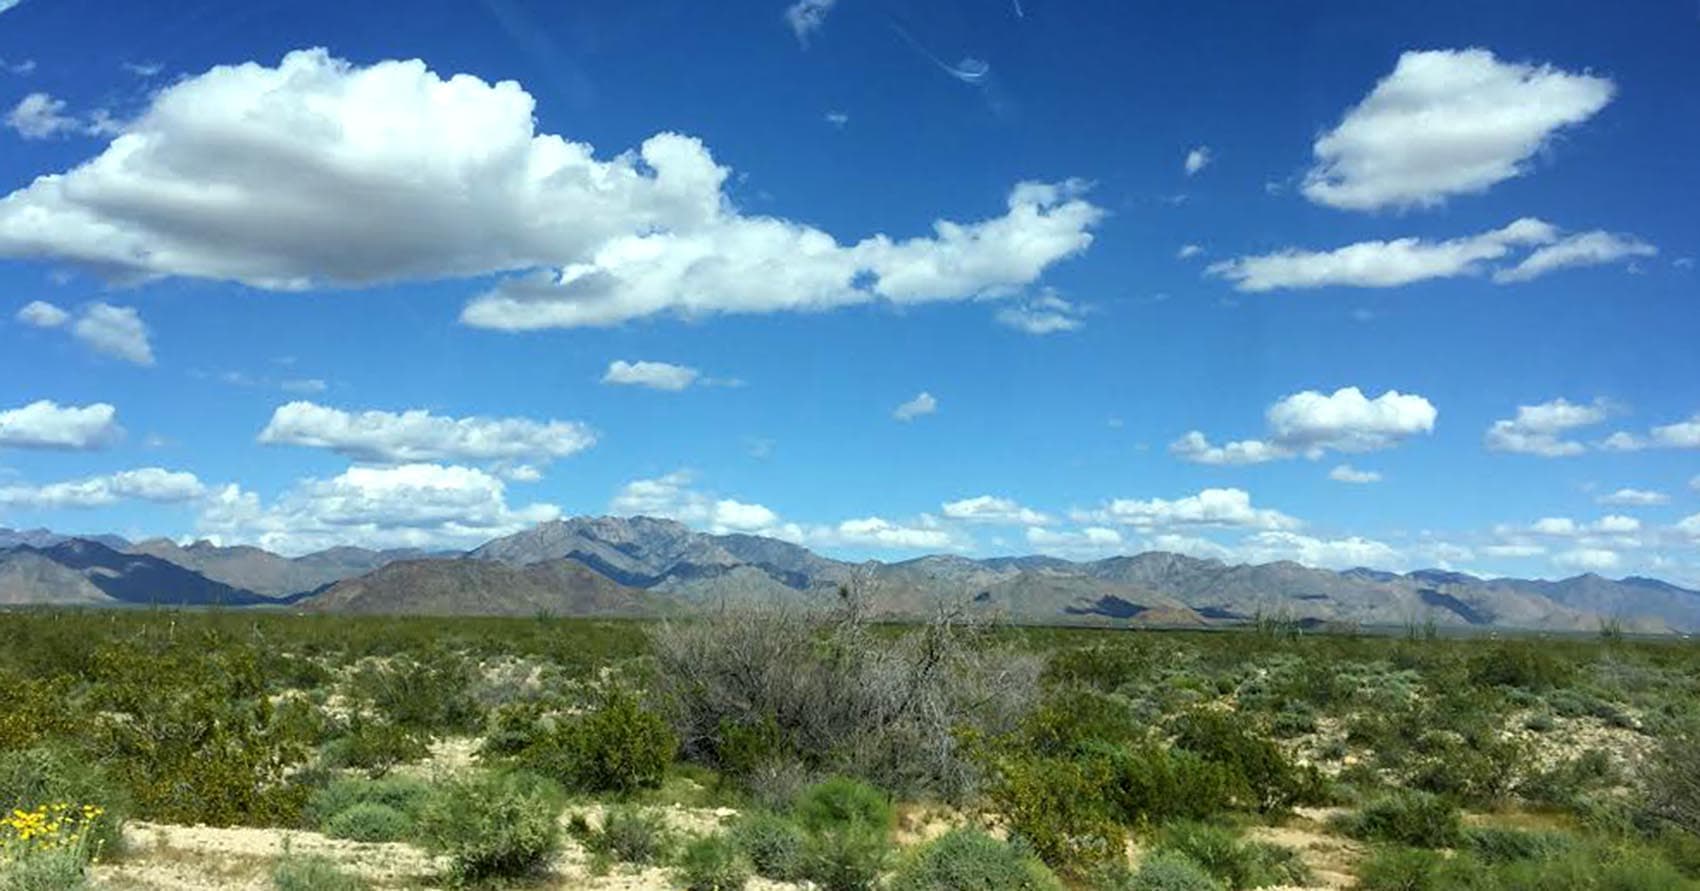 Wide open spaces in Arizona, during Kathy's road trip. (Kathy Gunst for Here & Now)